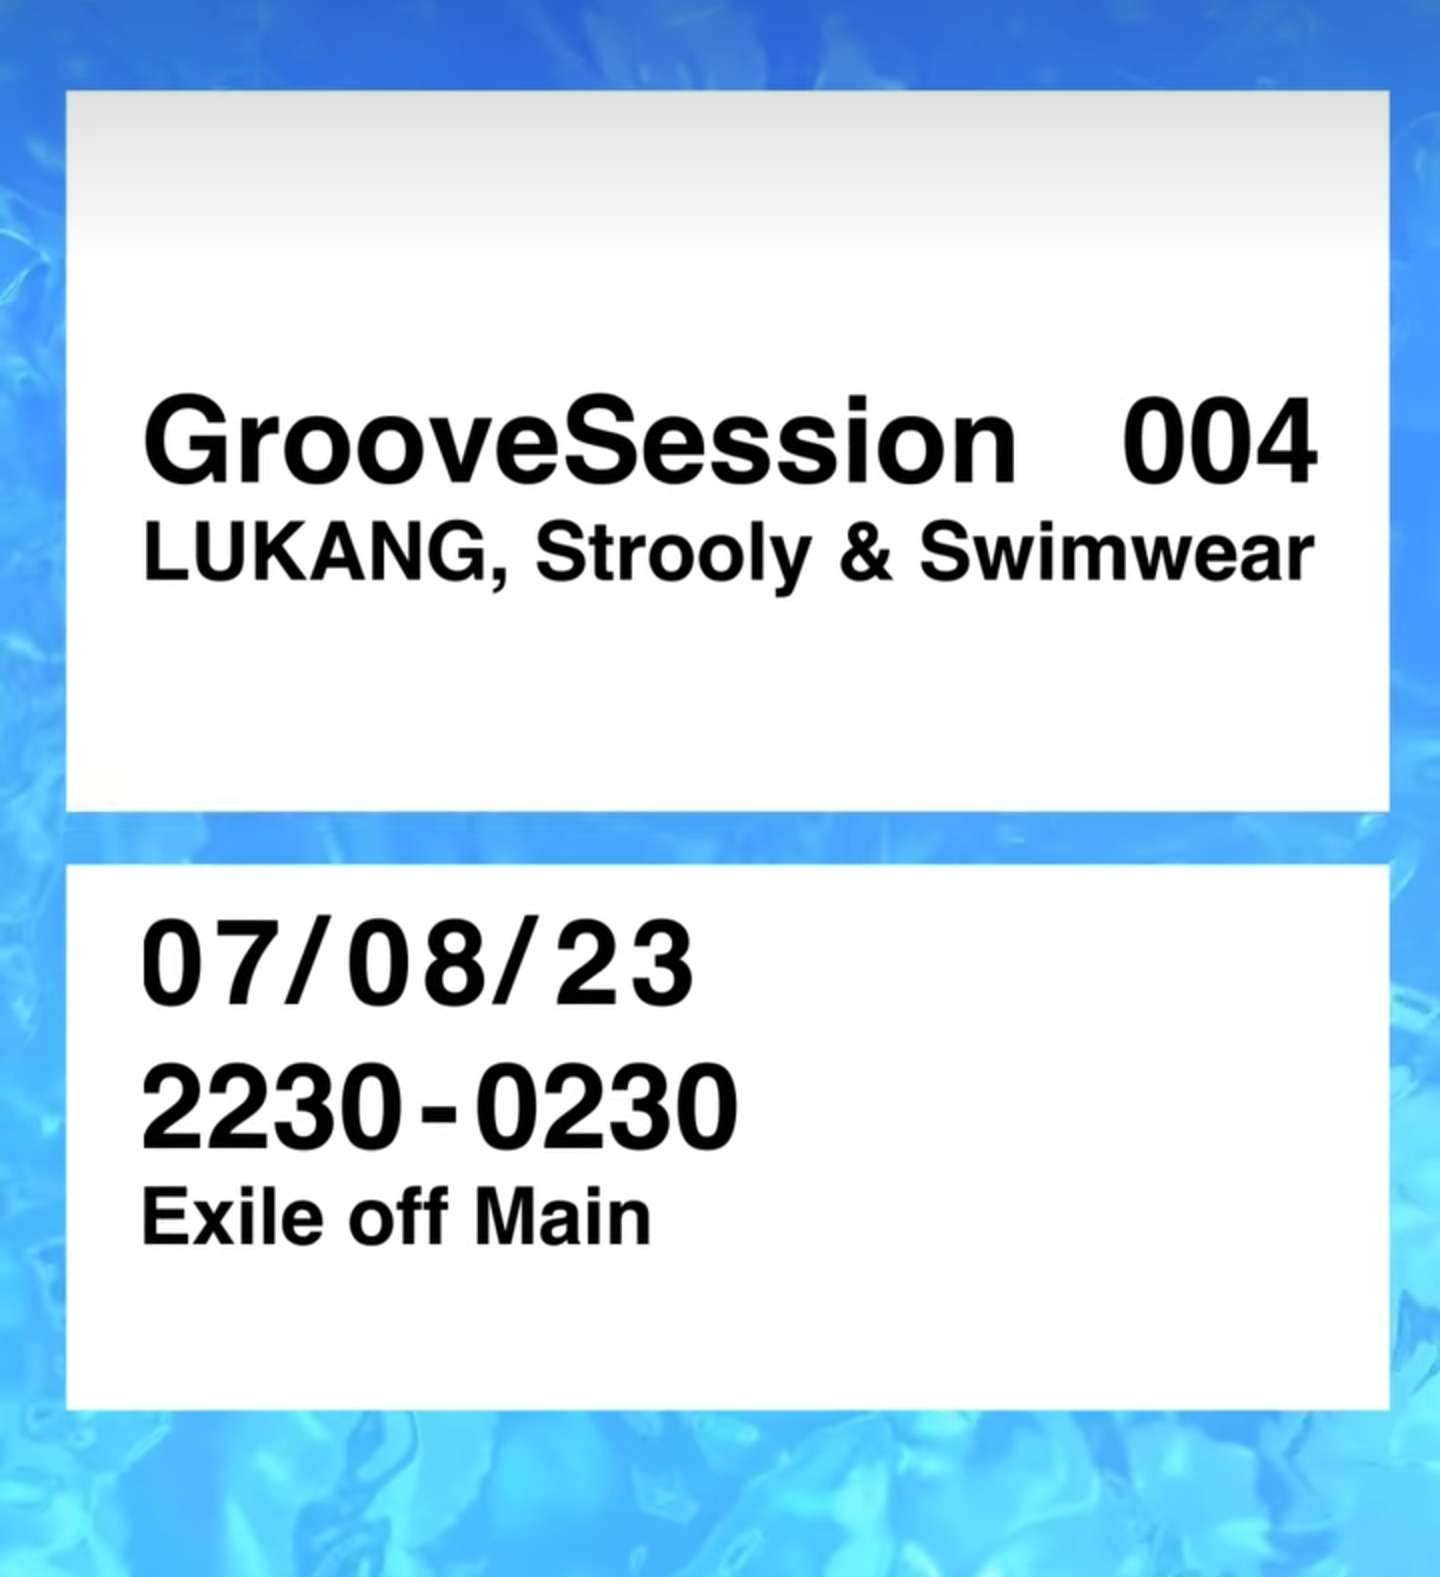 GrooveSession 004 - フライヤー表